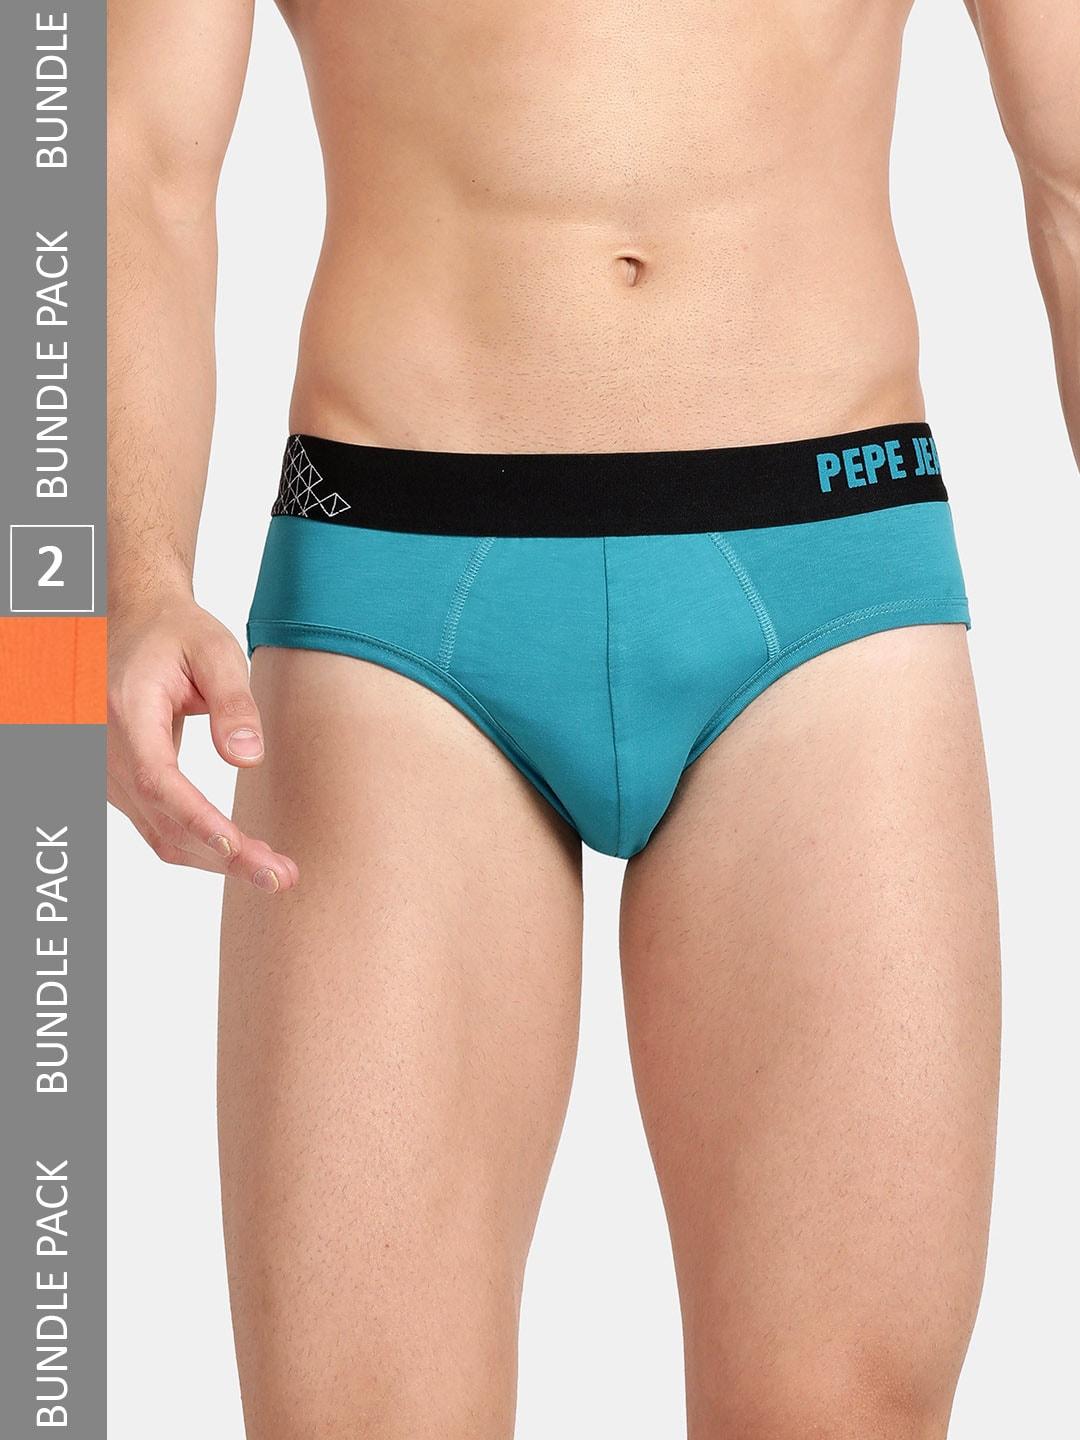 Pepe Jeans Men Pack Of 2 Mid-Rise Cotton  Basic Briefs